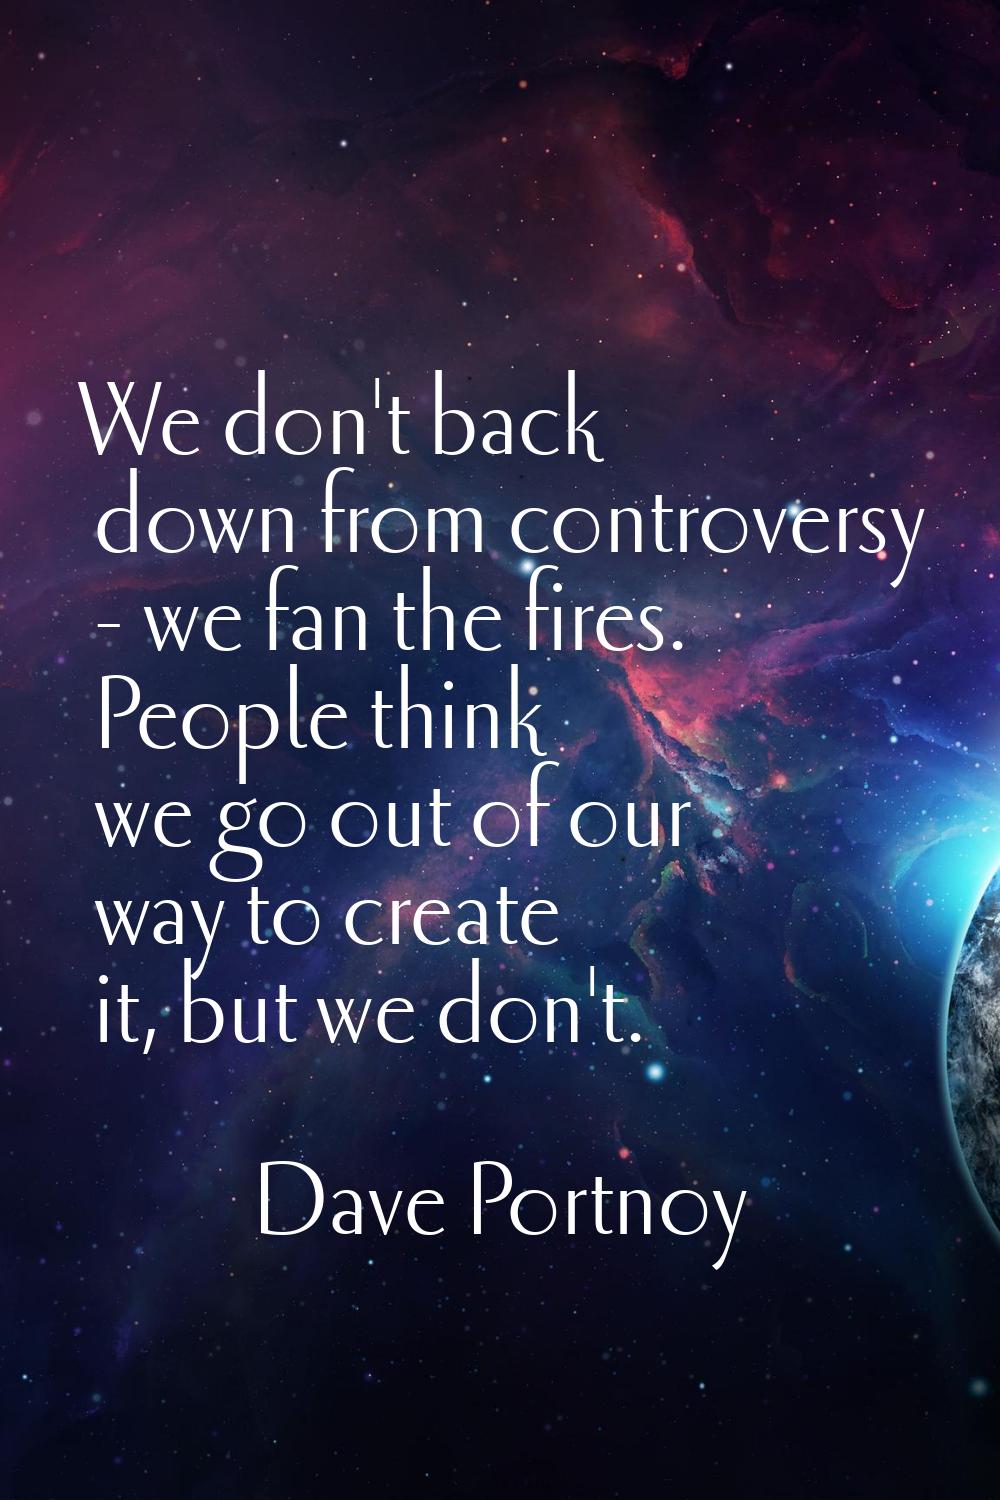 We don't back down from controversy - we fan the fires. People think we go out of our way to create